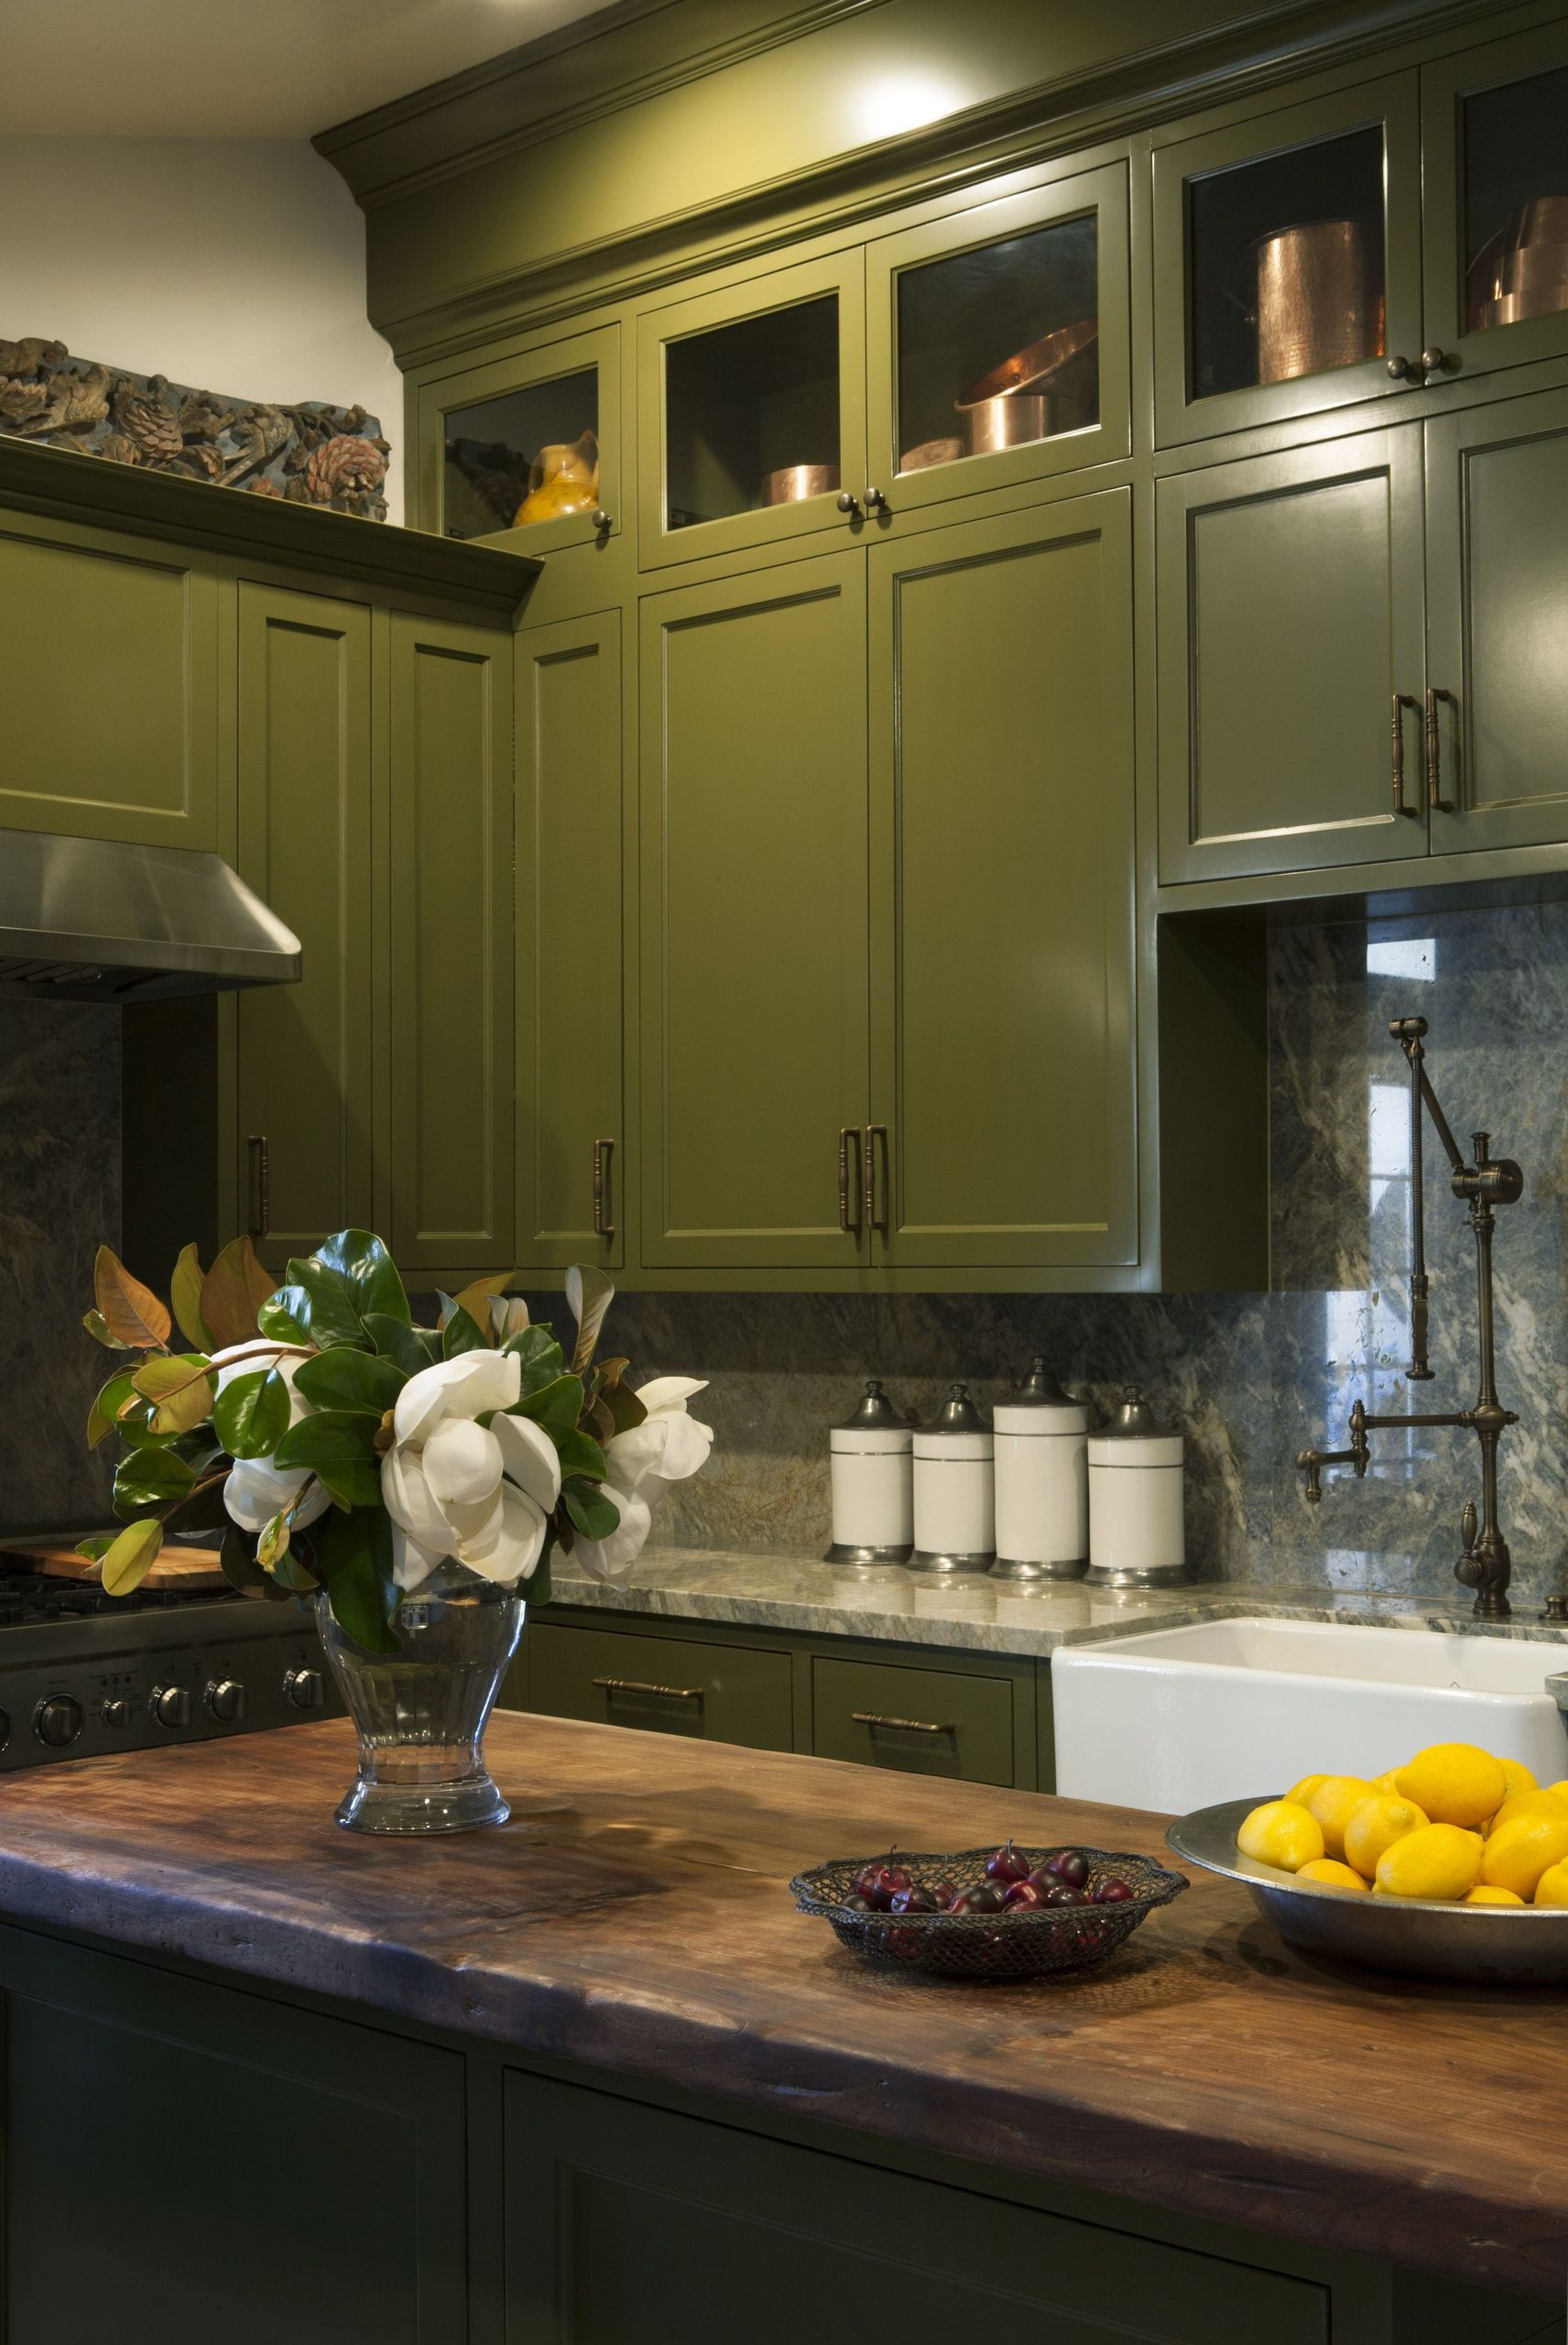 Olive Green Kitchen Walls
 Windowless kitchen with olive green cabinetry